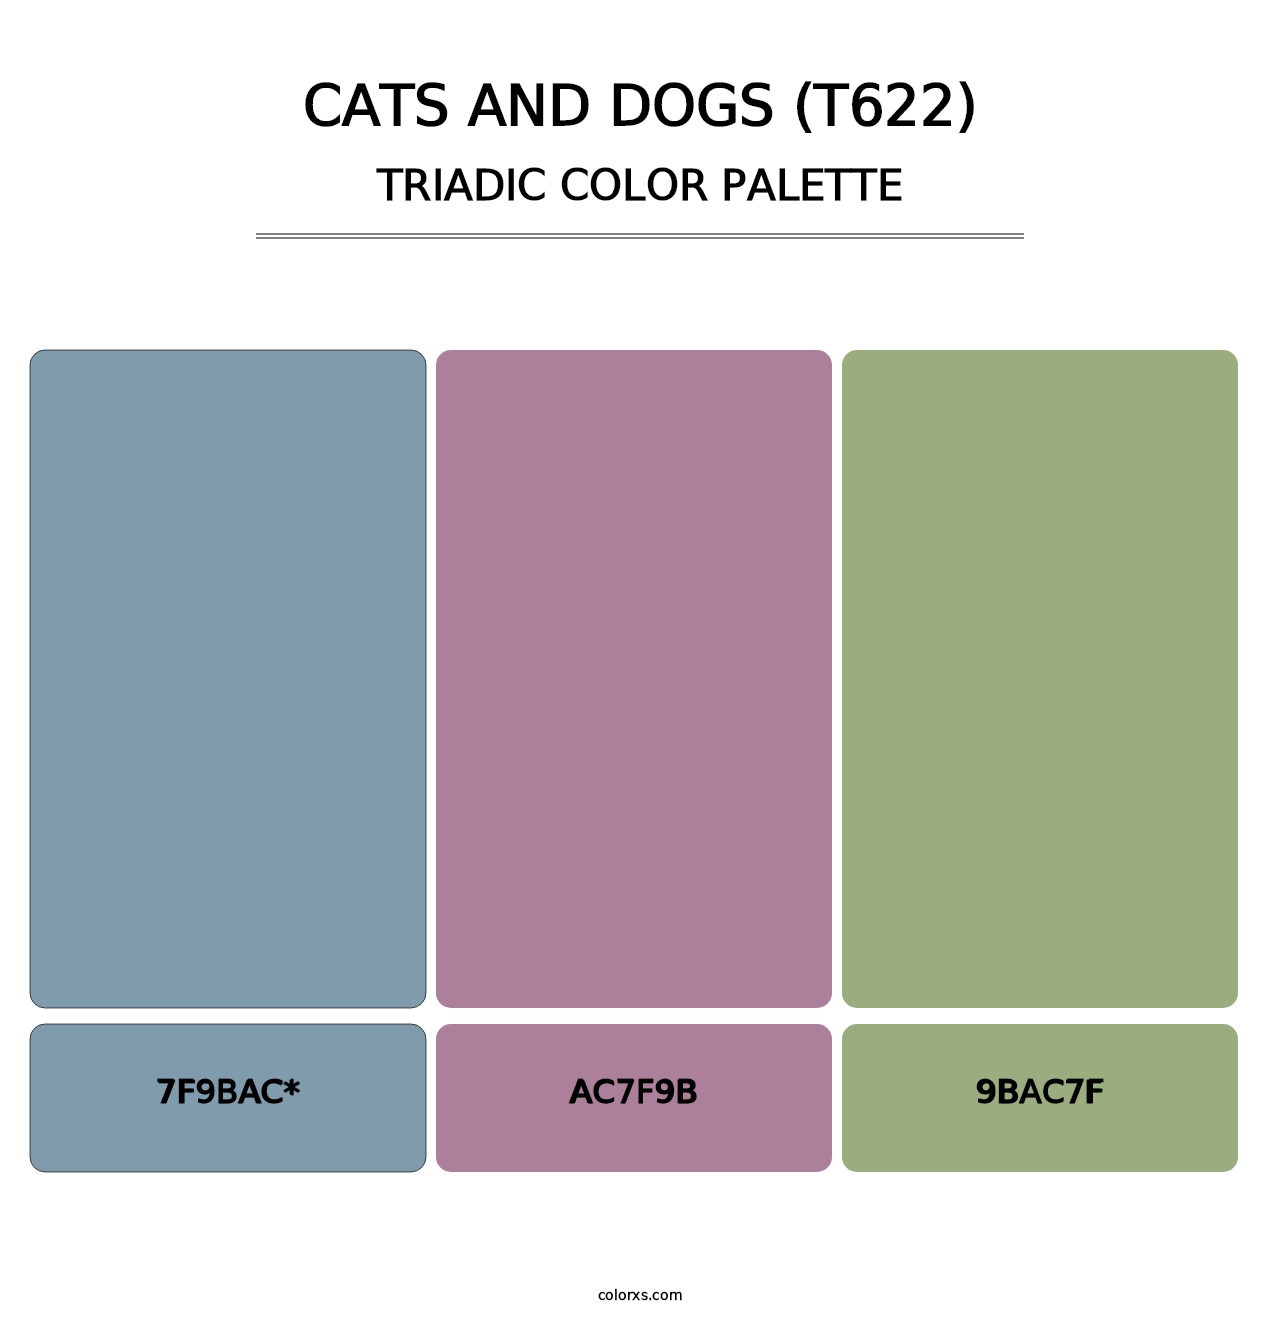 Cats and Dogs (T622) - Triadic Color Palette